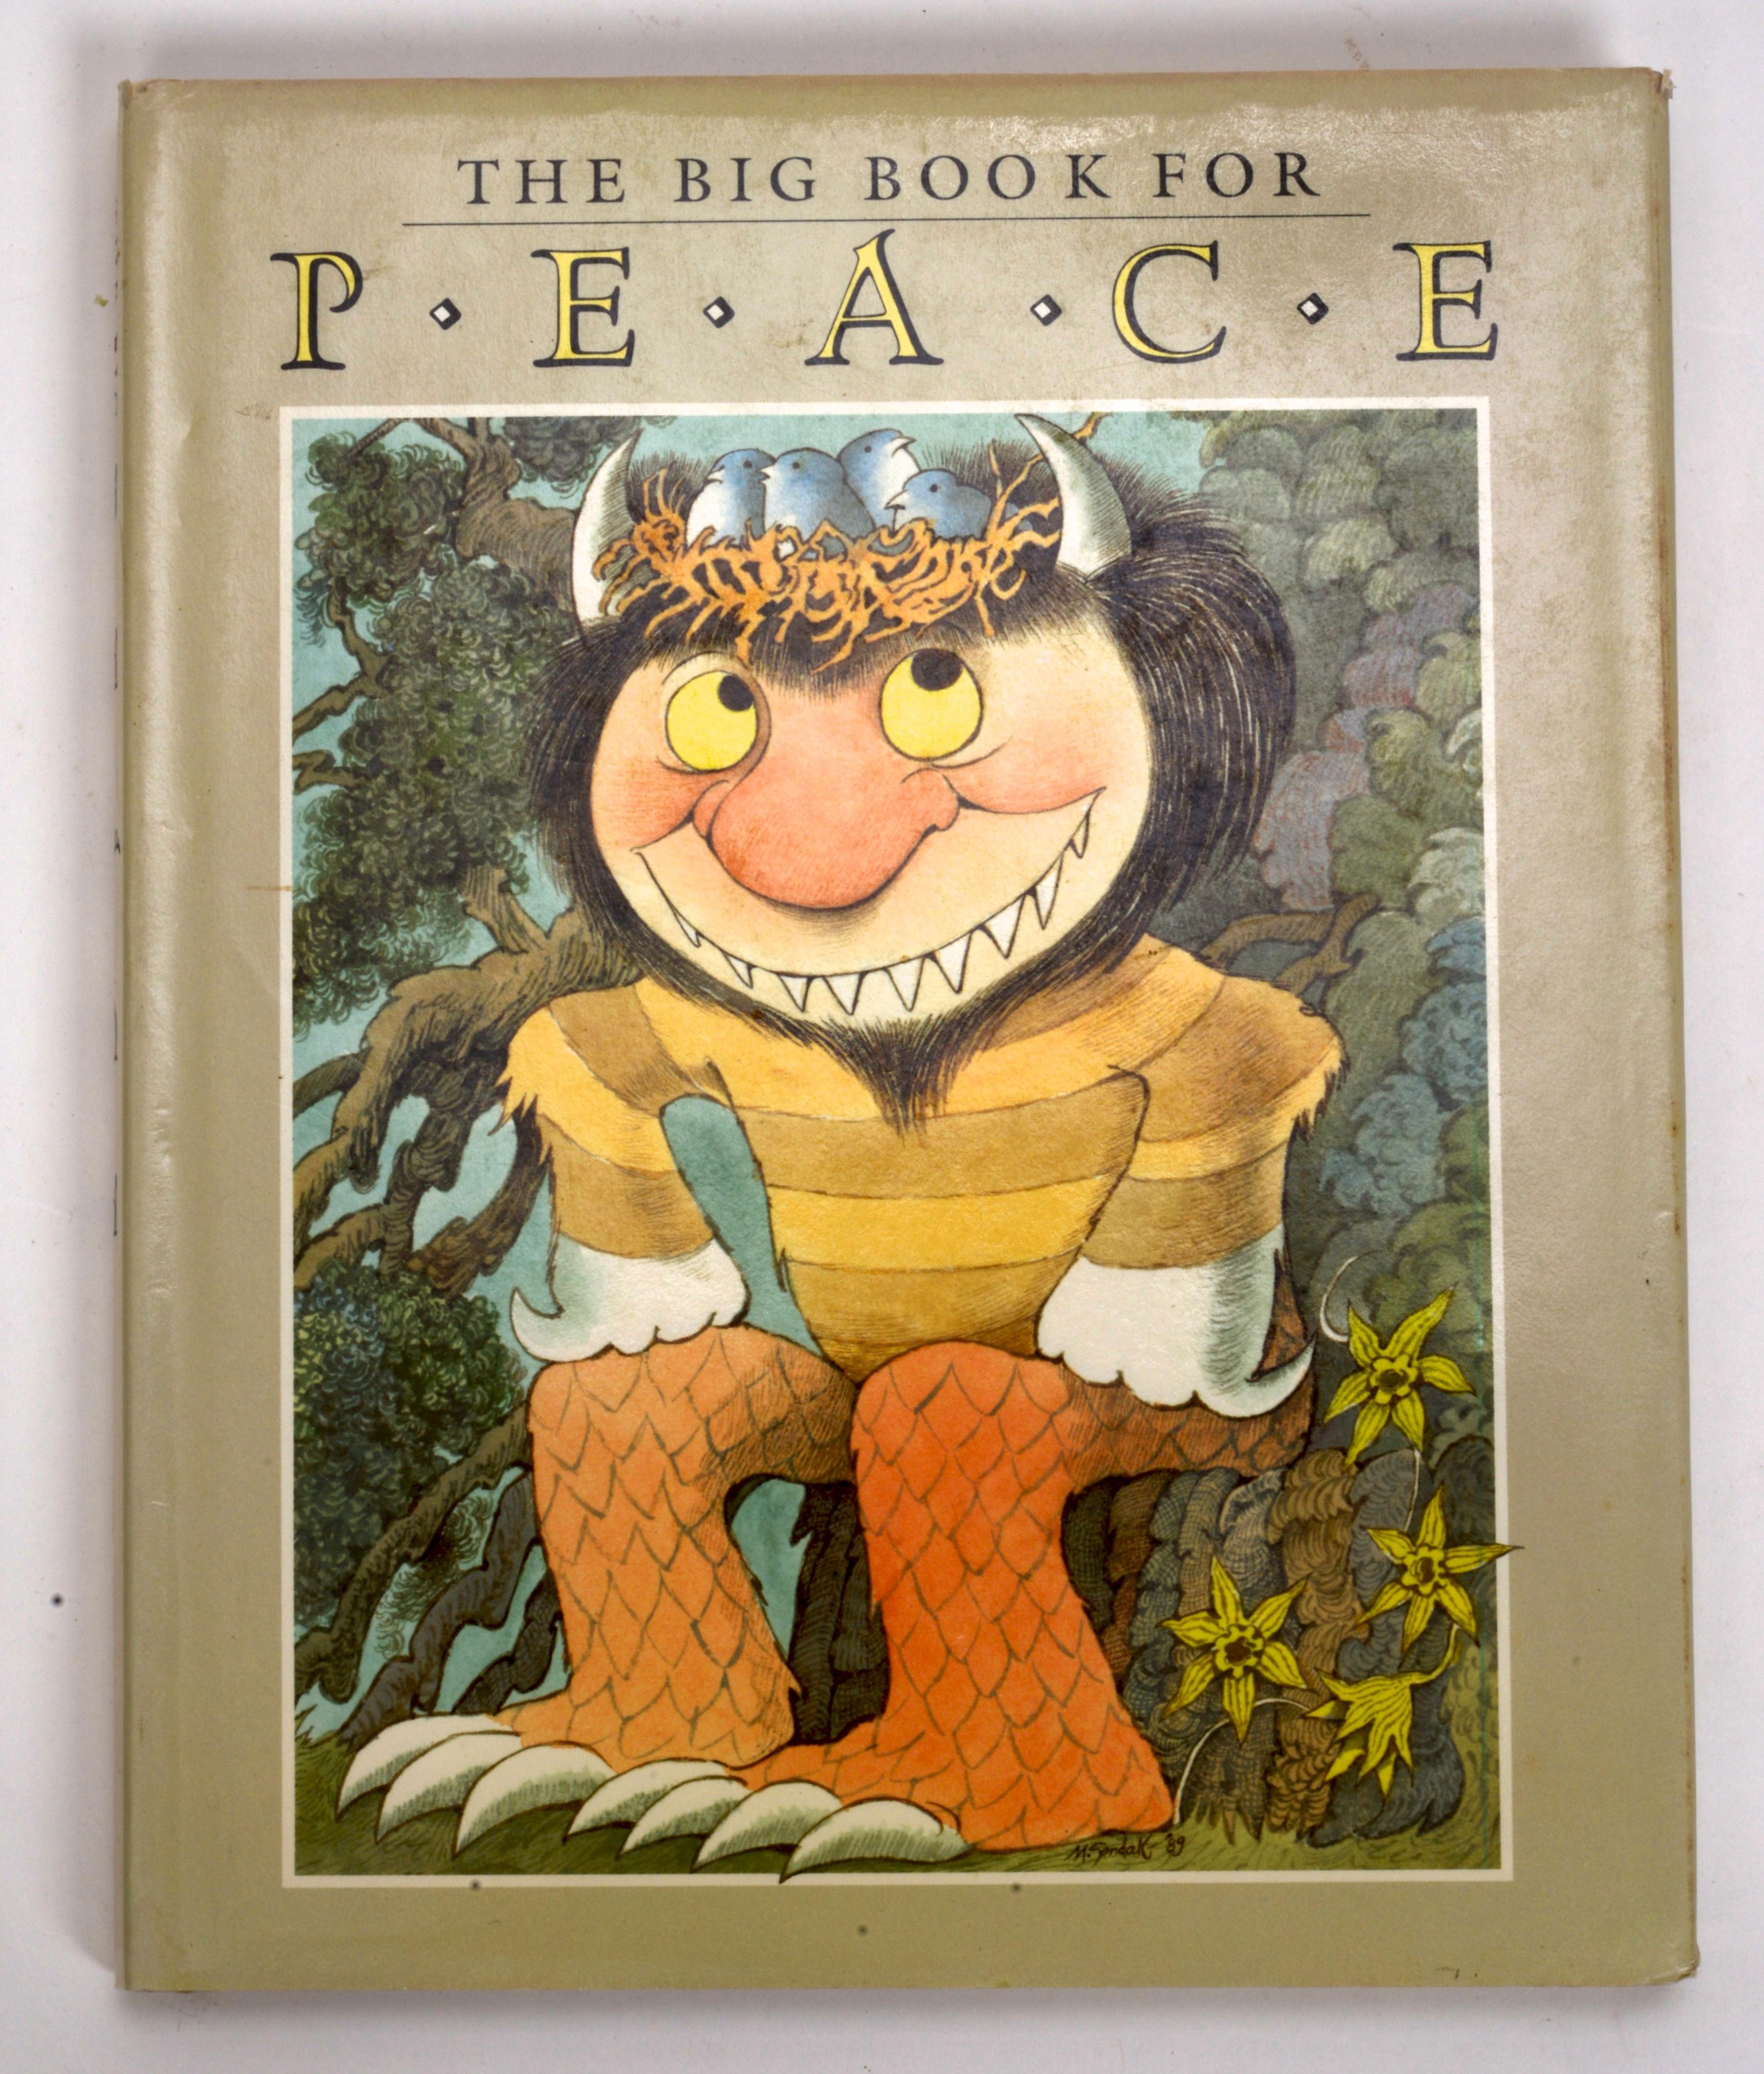 Paper Set of Six Books with Illustrations by Maurice Sendak